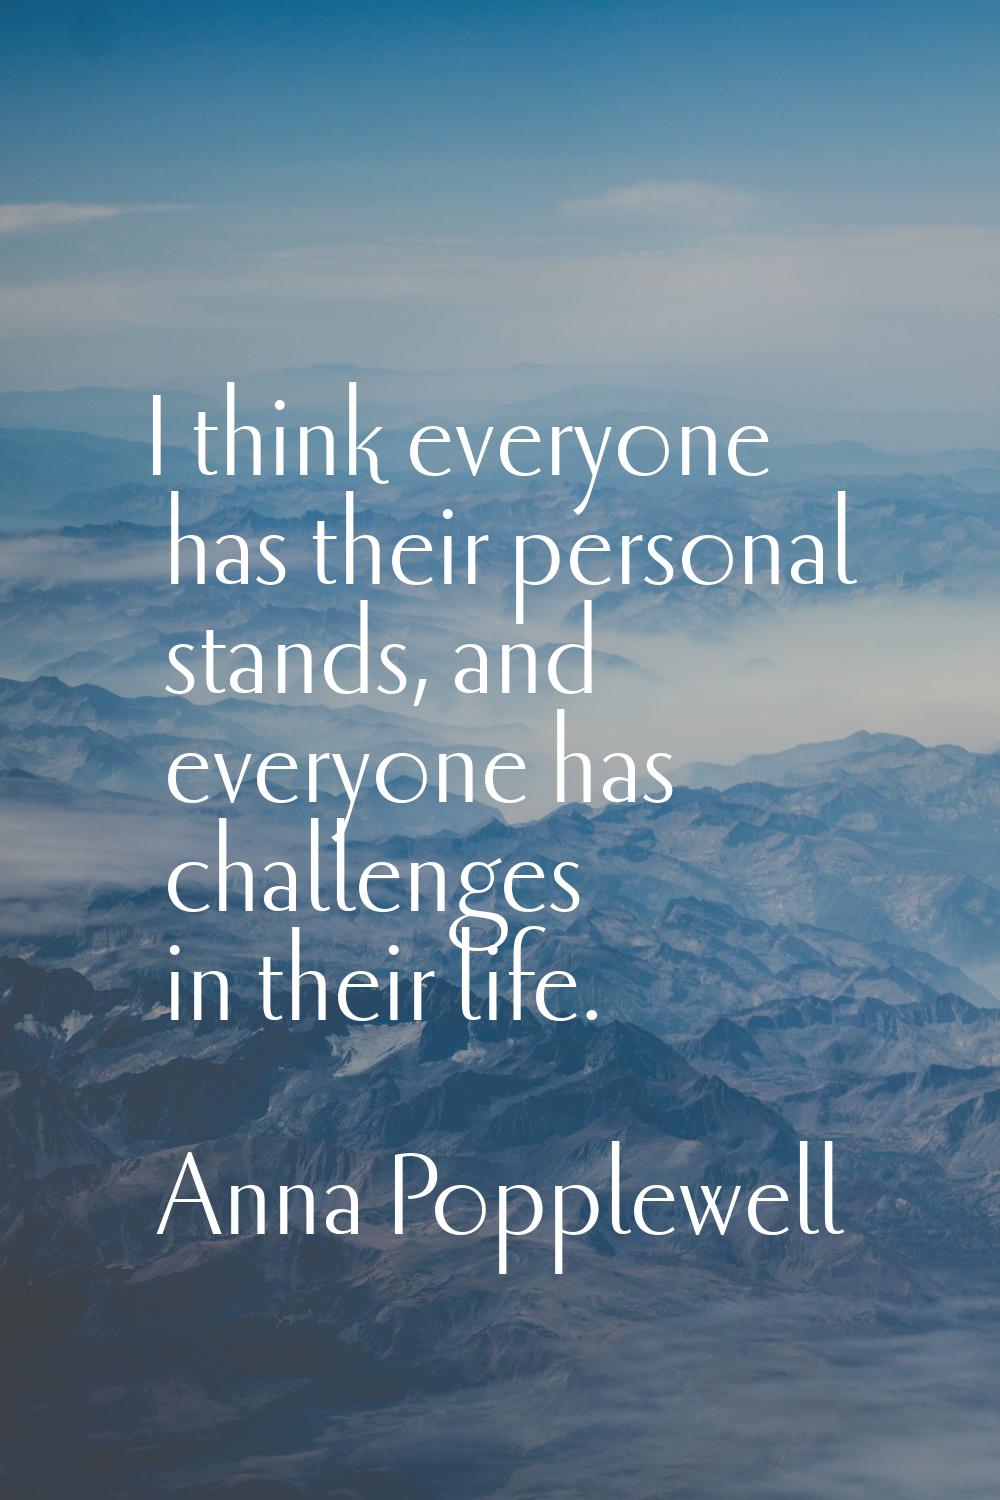 I think everyone has their personal stands, and everyone has challenges in their life.